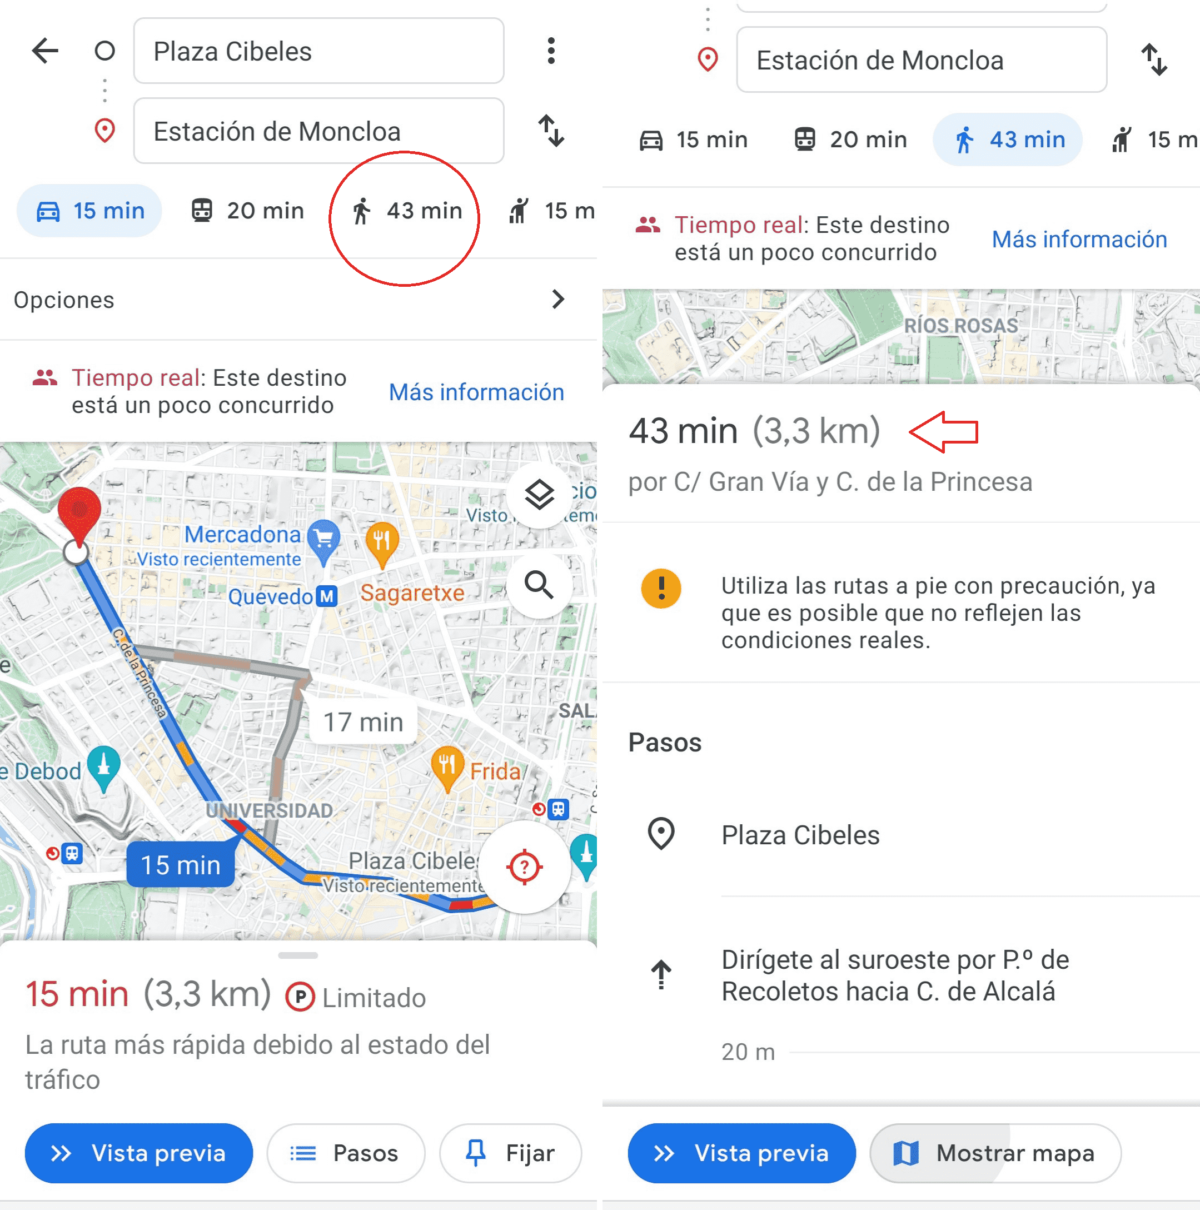 How to calculate a walking route on Google Maps